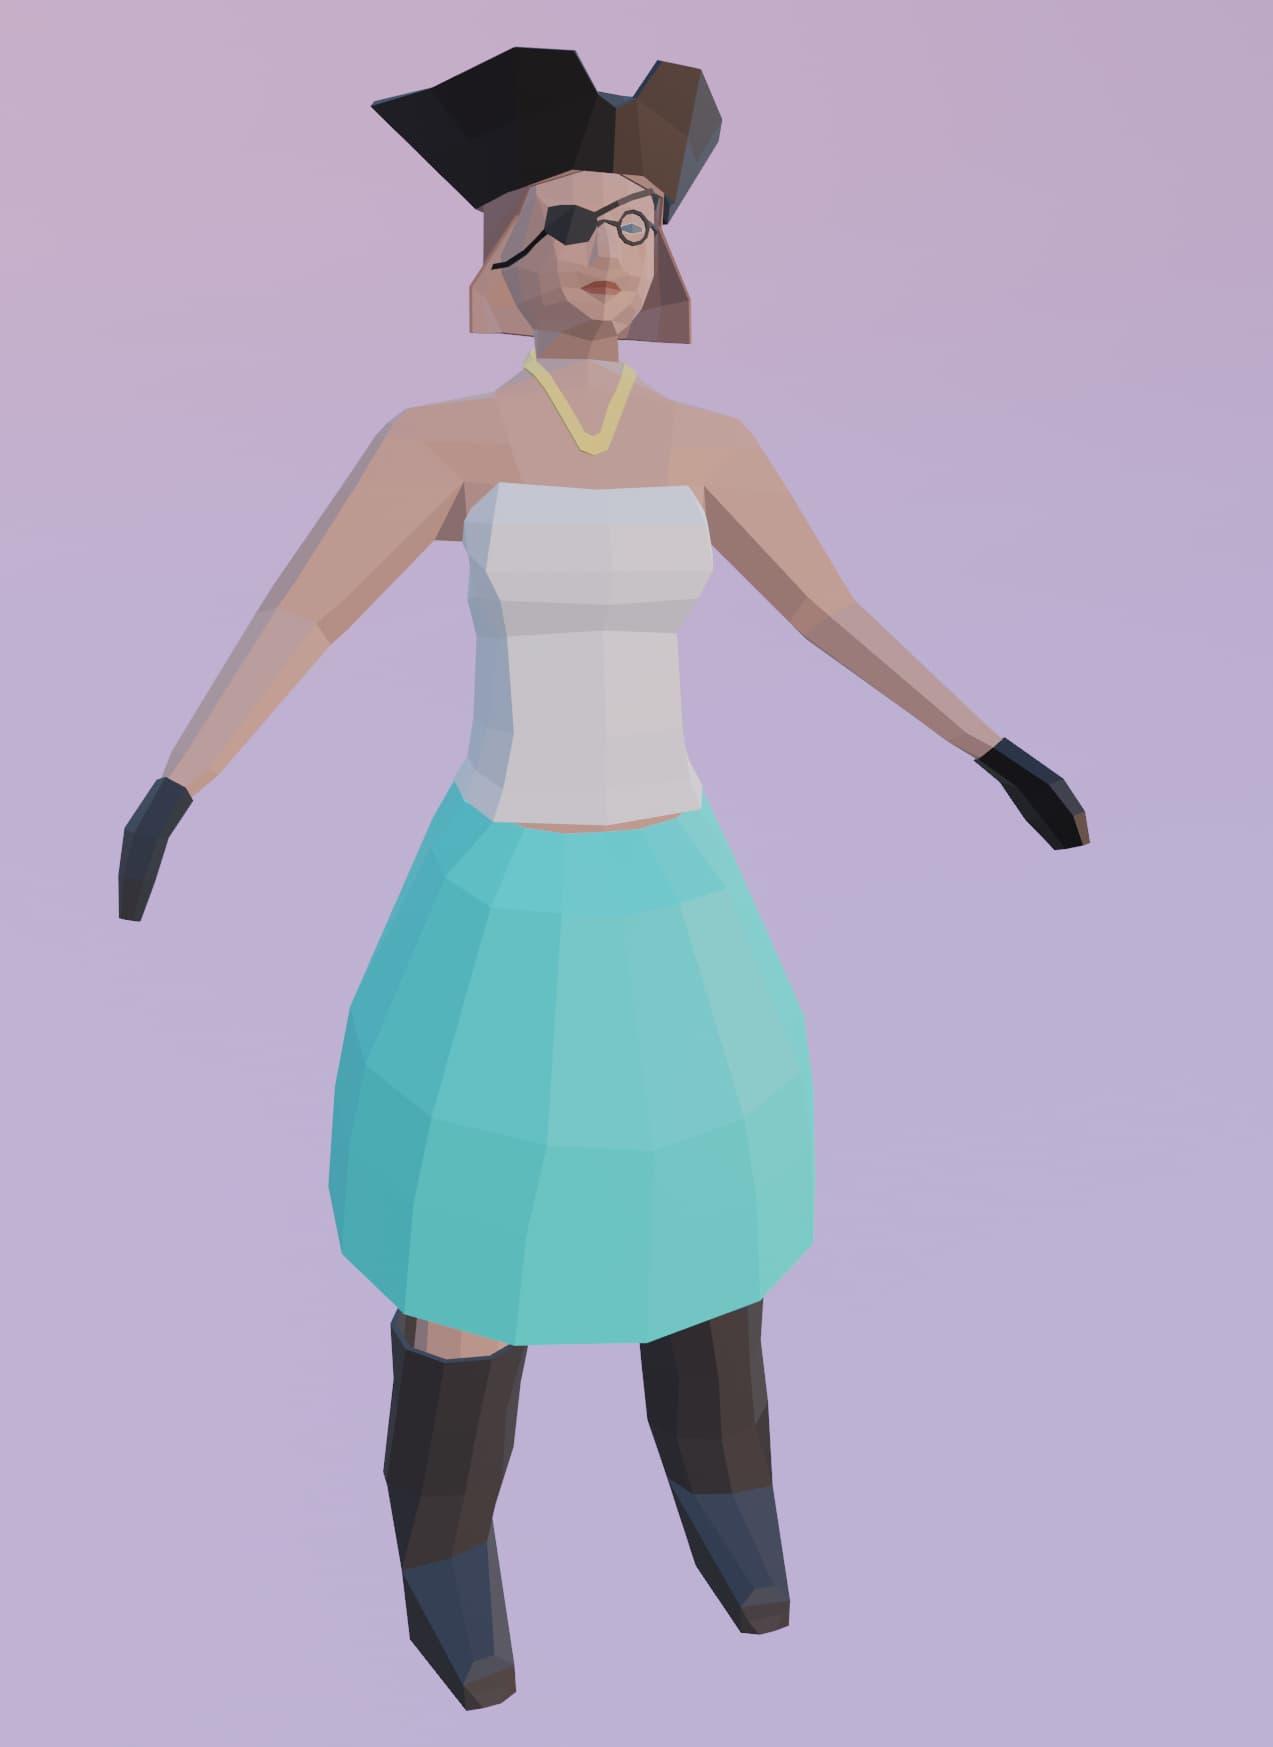 A low-poly 3D model of a woman with light skin, light-brown hair, a black pirate hat, an eyepatch over one eye and a monocle in the other, a gold necklace, a white top,, a blue skirt, and black gloves and boots